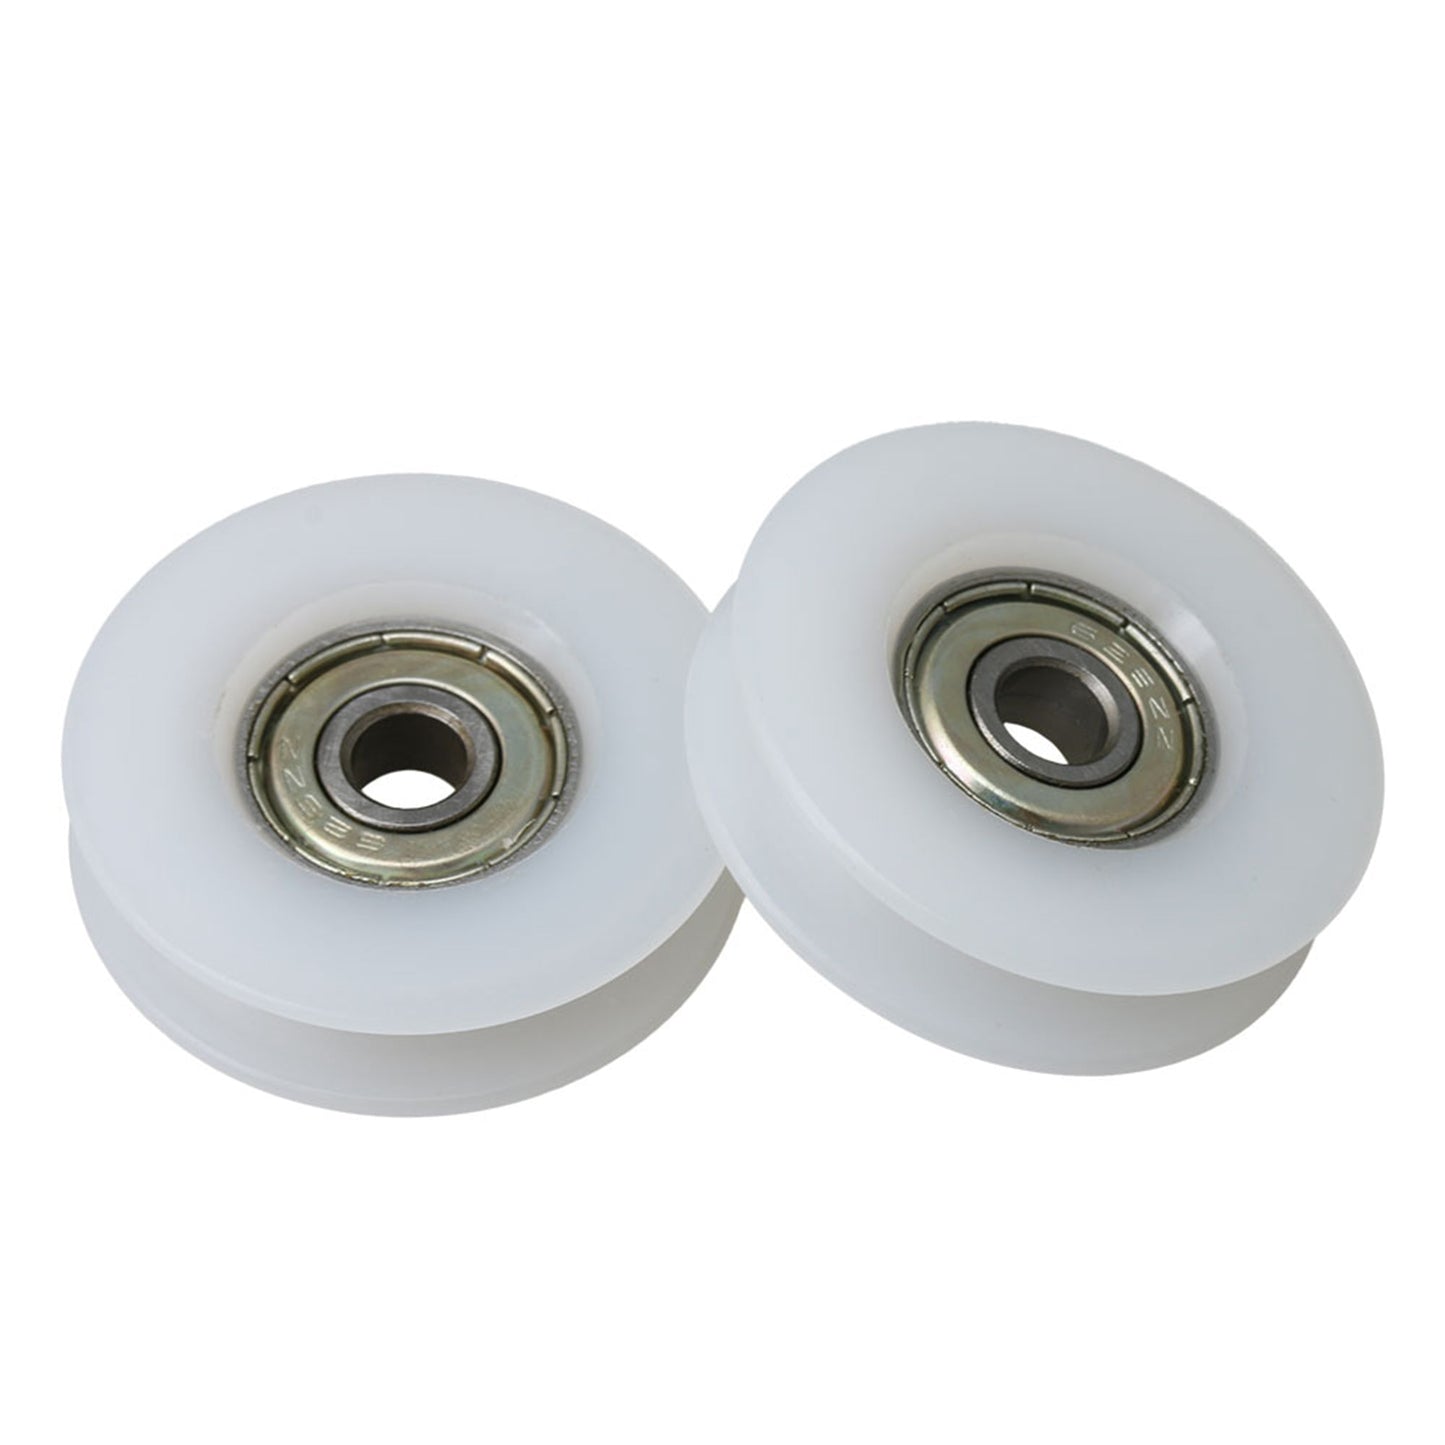 BQLZR 6.5x35.5x9mm White Nylon Round Pulle U-shaped Bearings Track Roller Bearing for Furniture Hardware Accessories Pack of 2